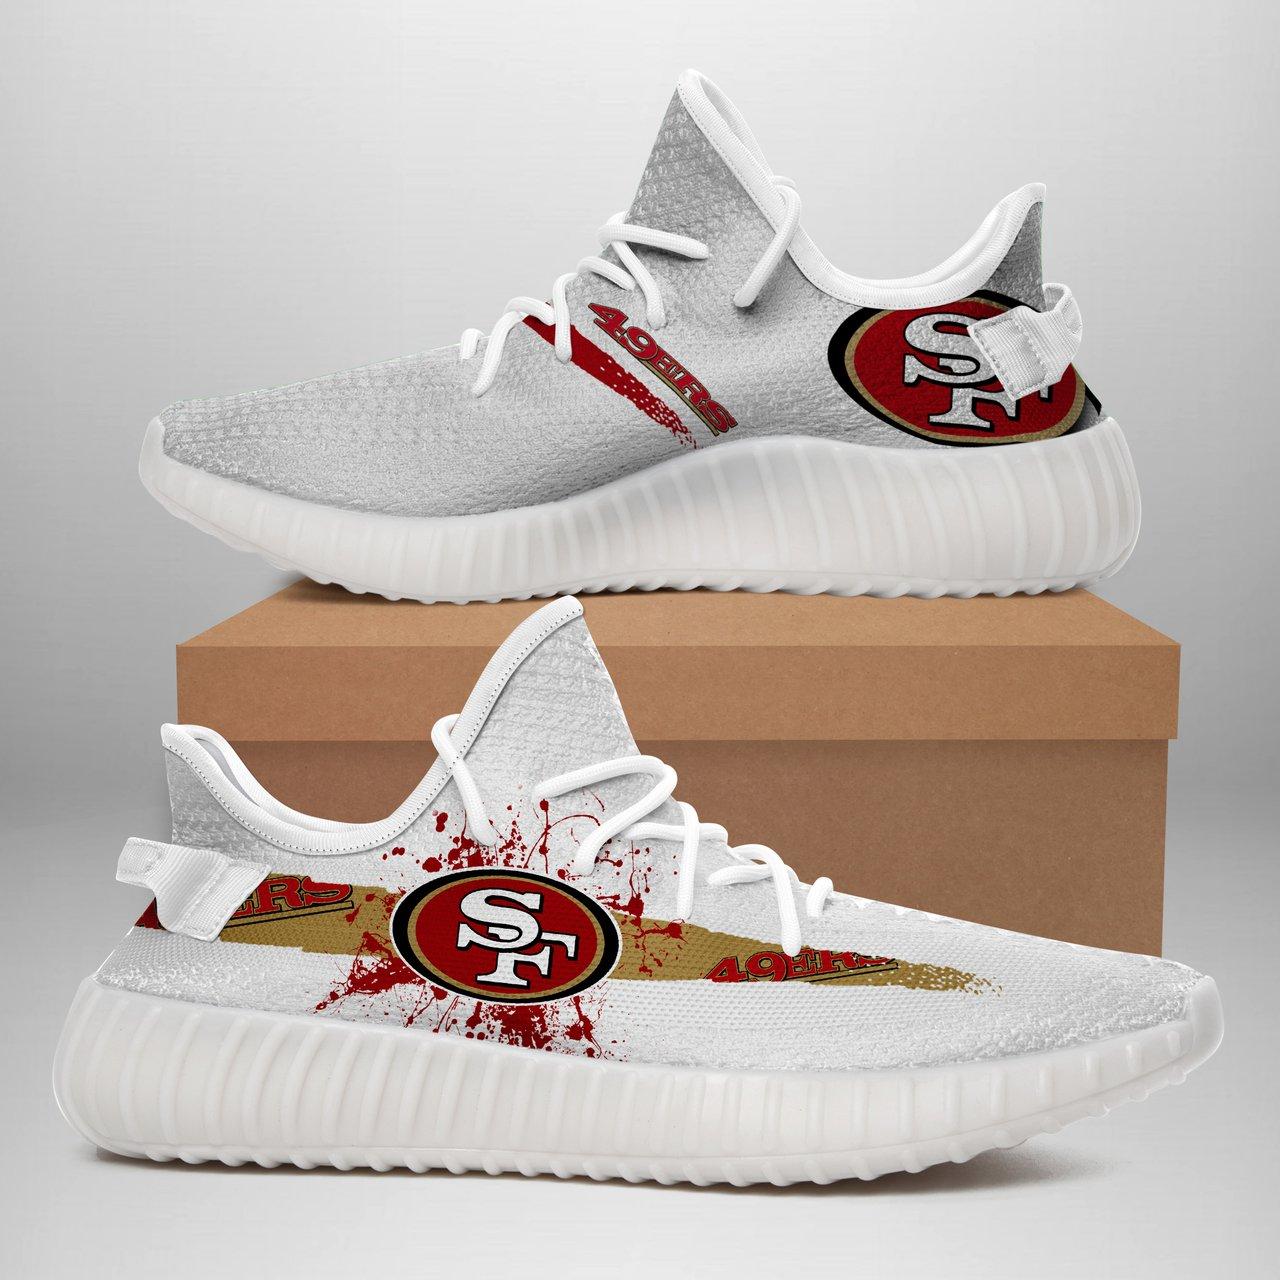 49ers tennis shoes